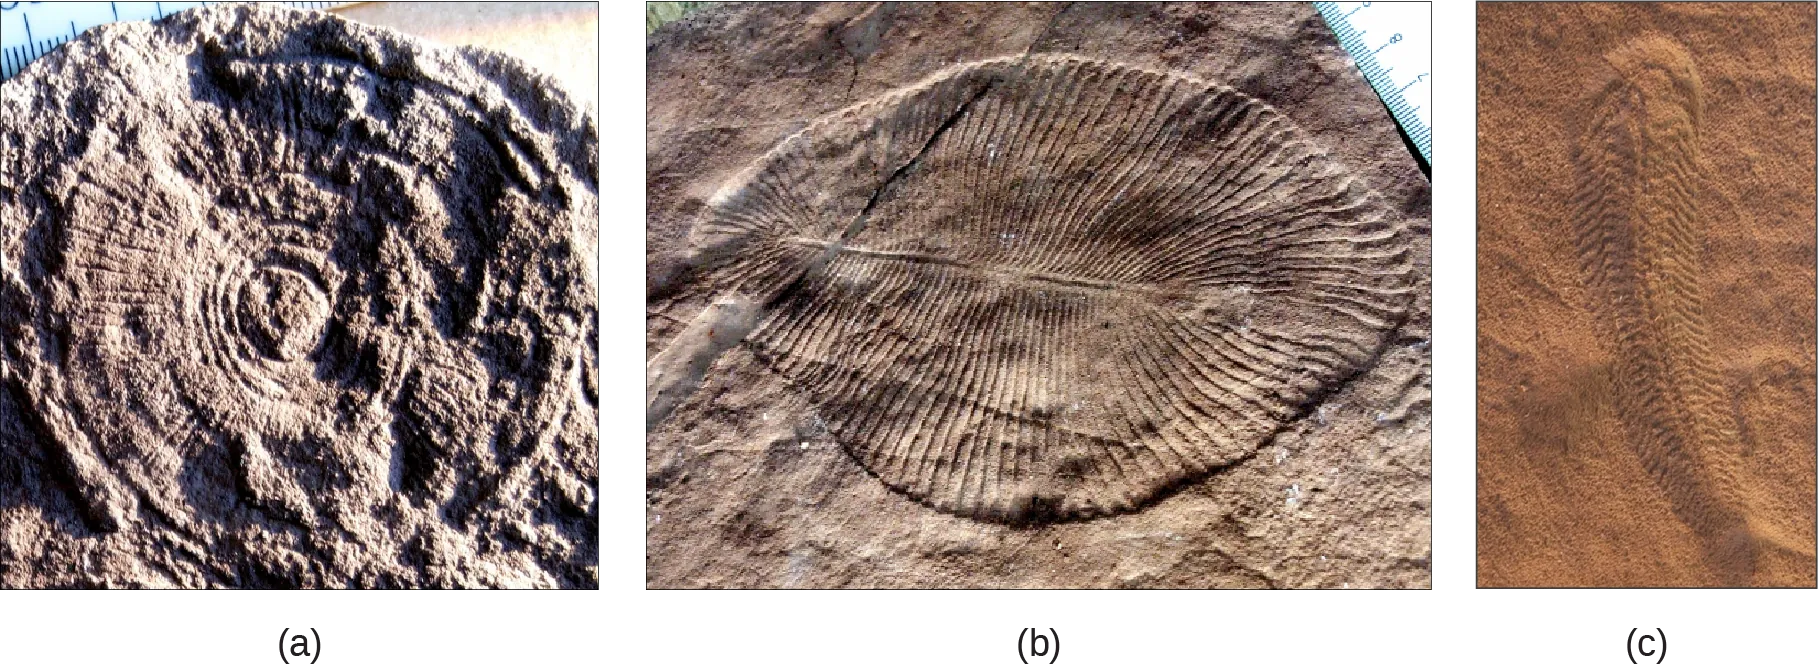 Part a shows a fossil that resembles a wheel, with spokes radiating out from the center, imprinted on a rock. Part b shows a fossil that resembles a teardrop shaped leaf, with grooves radiating out from a central rib. Part c shows a fossil that is much longer than it is wide, with many small ribs and a tail.